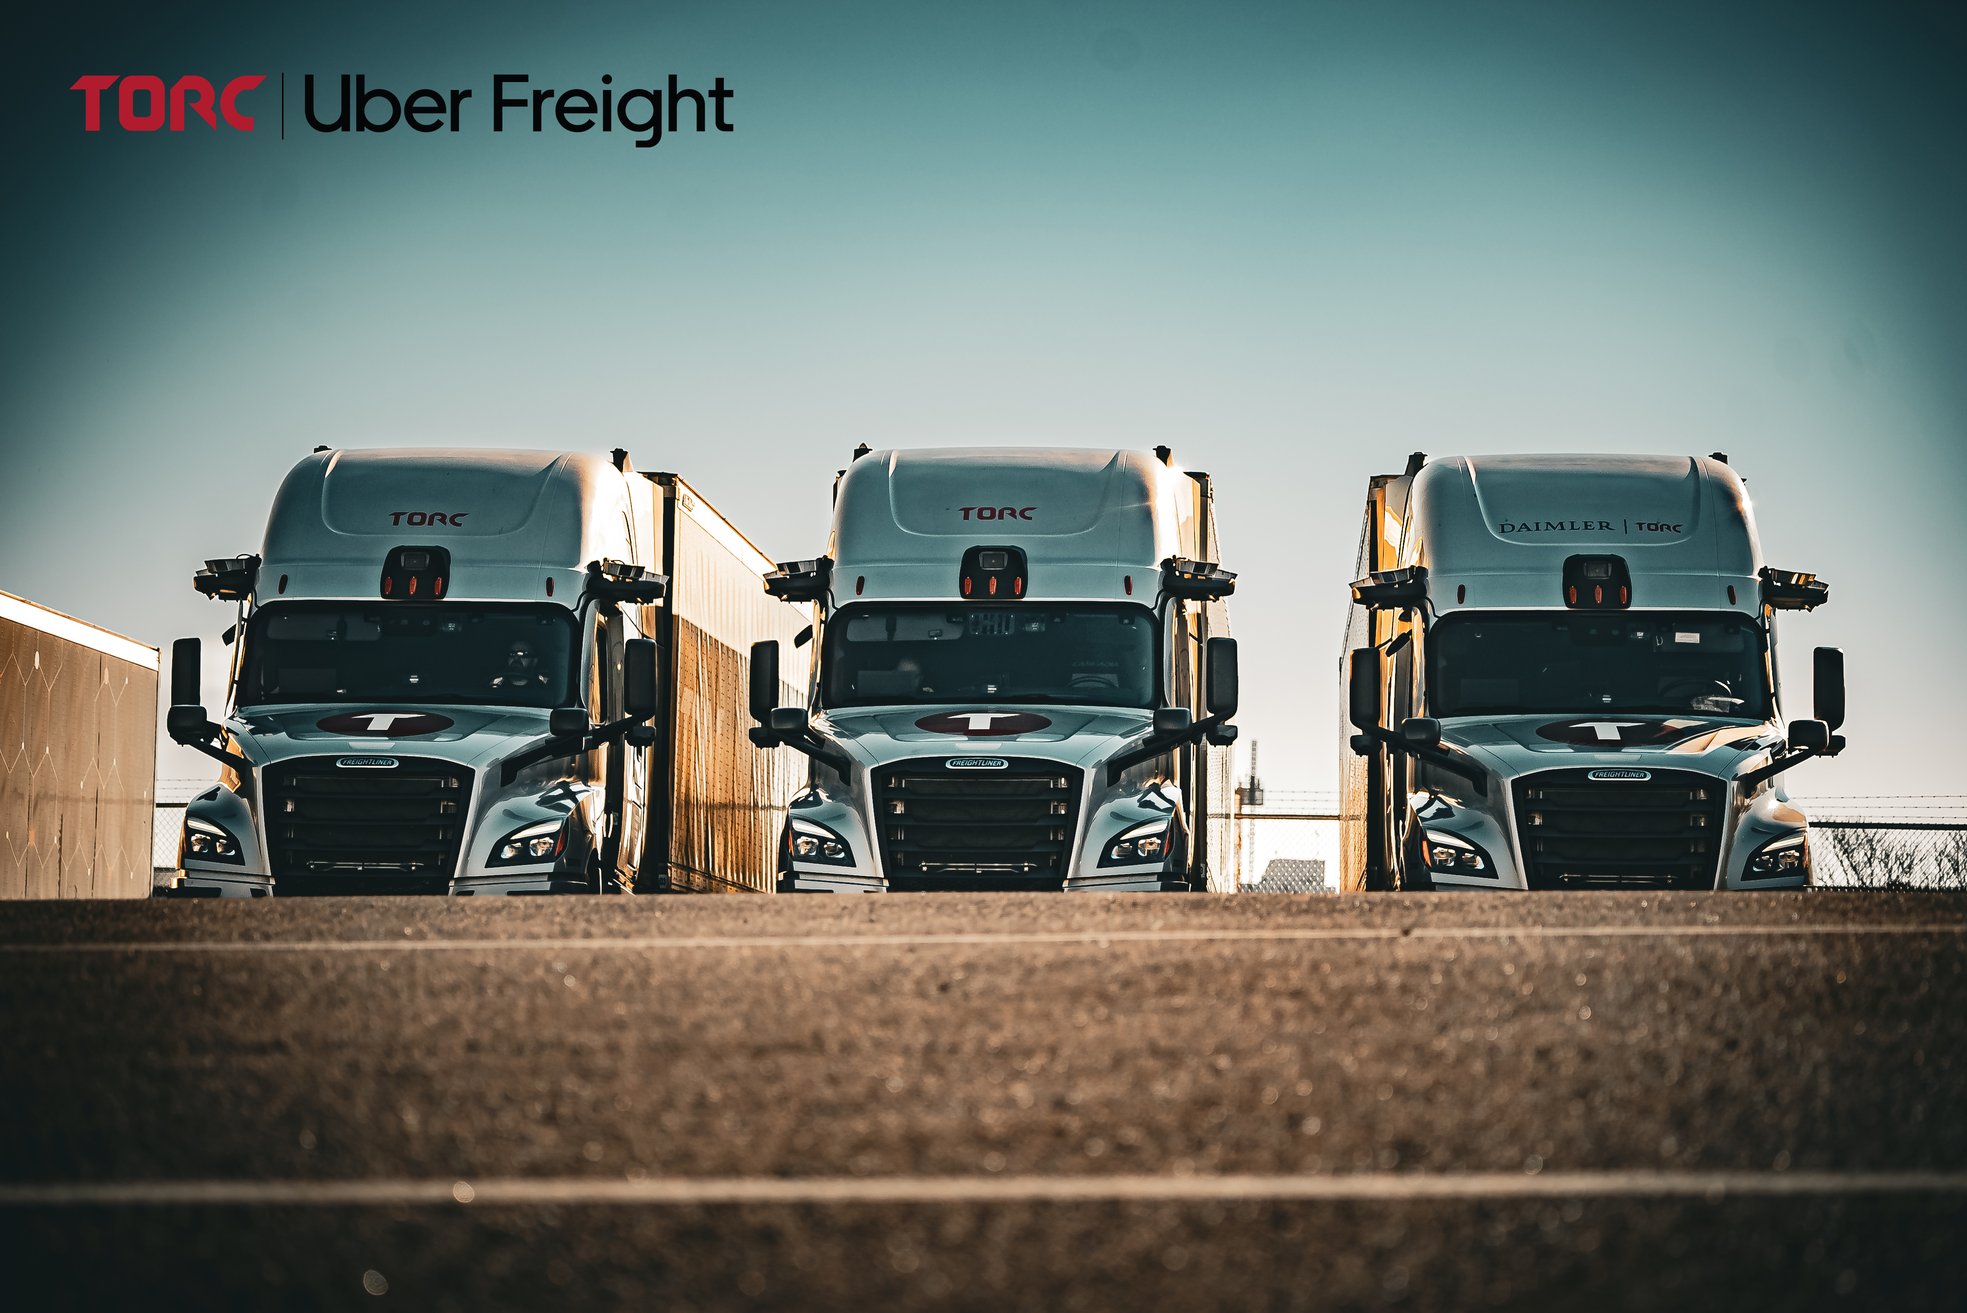 Torc_Uber Freight announcement photo